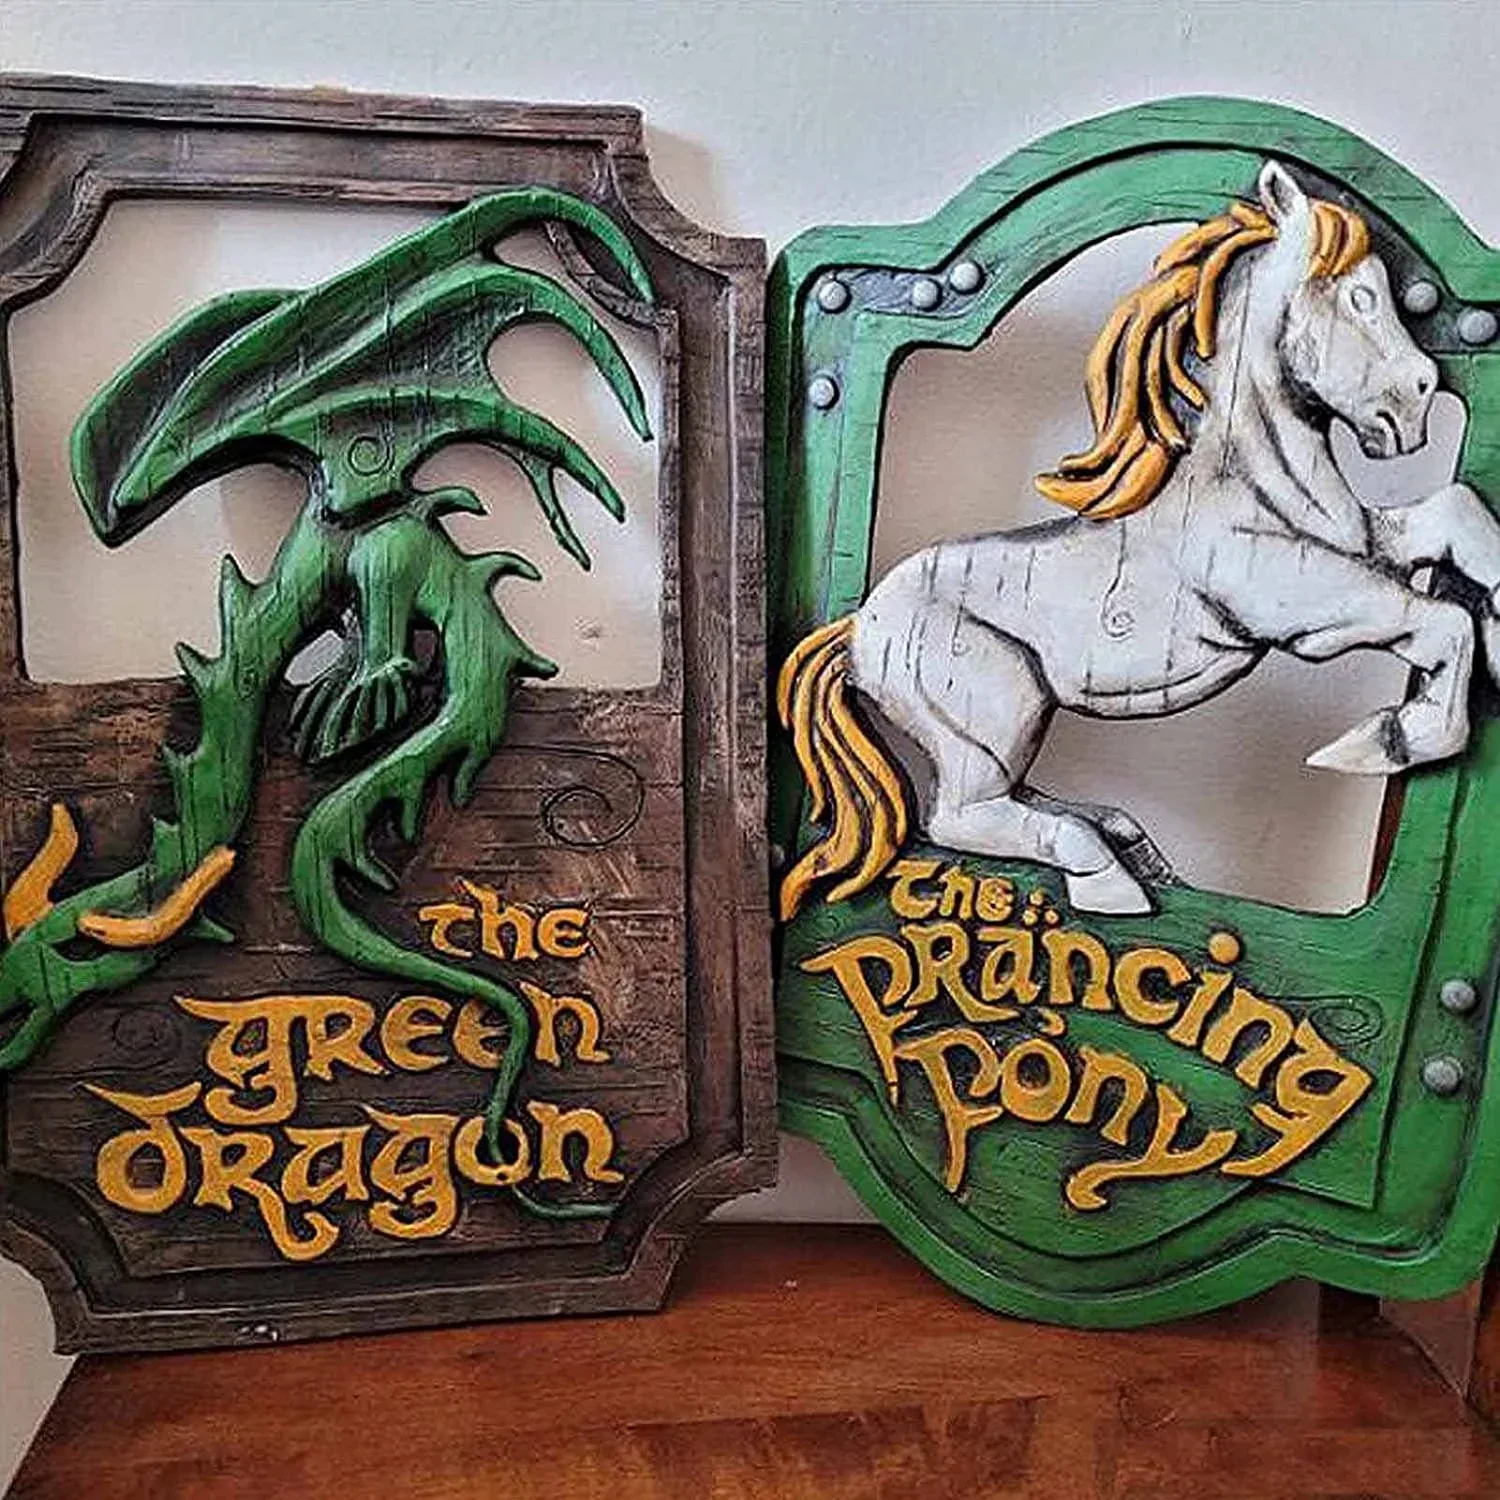 

'The Prancing Pony' Or 'The Green Dragon' Pub Signs Set,Prancing Pony Wood Sign Home Wall Art Decorations,Home Decorative Sign